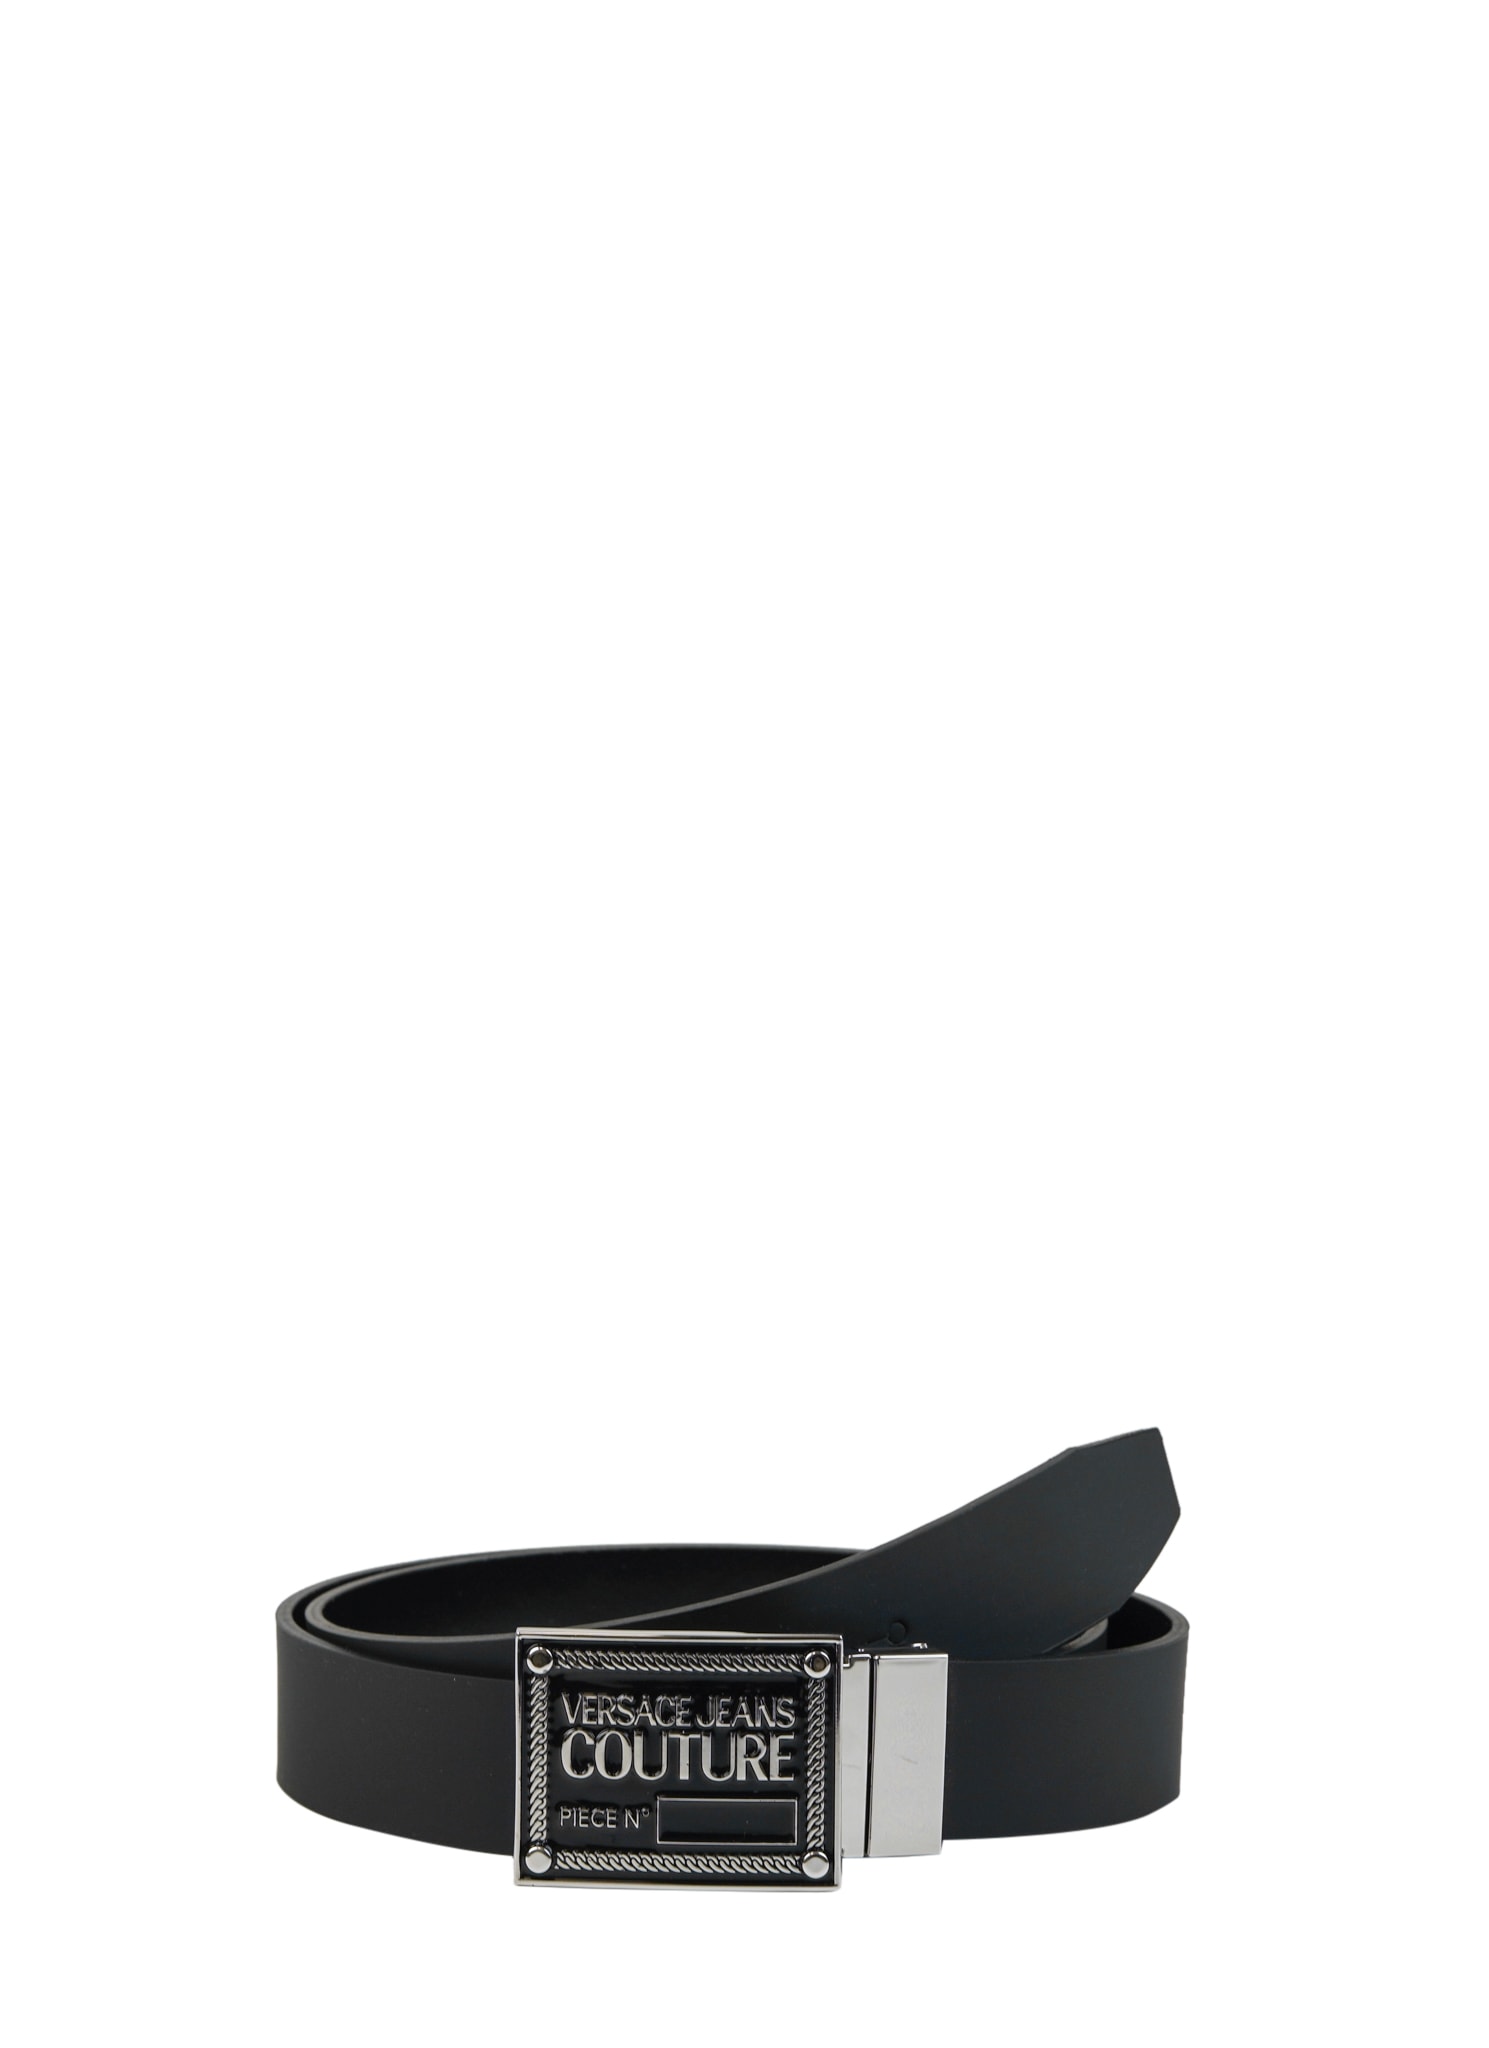 Versace Jeans Couture Brushed Calf Belt